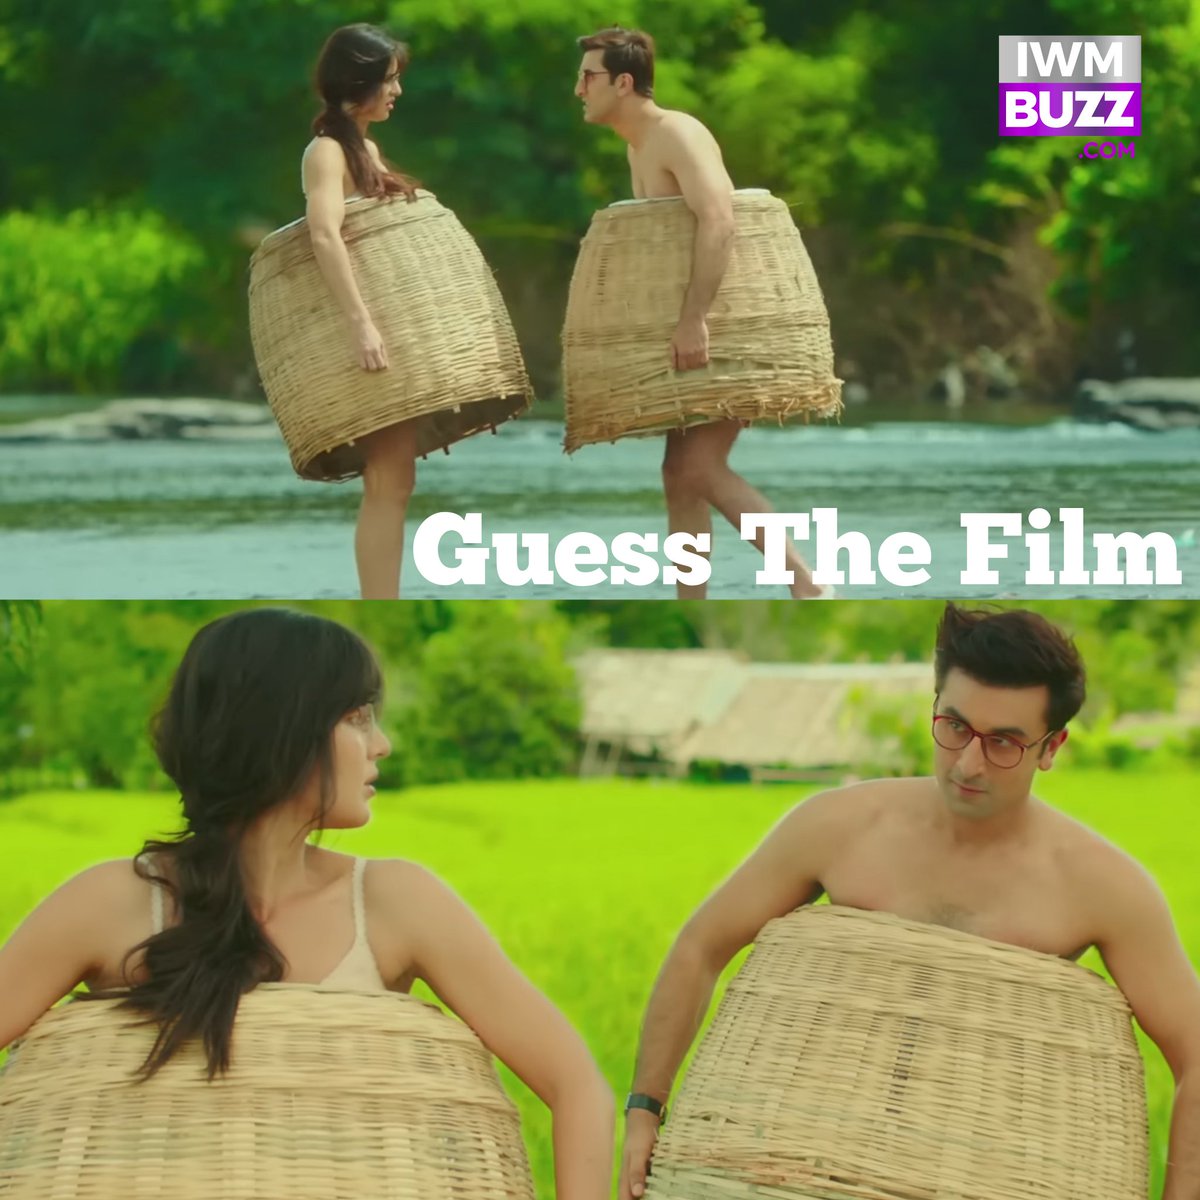 Can you guess the film from this picture? . . . #guess #ranbirkapoor #katrinakaif #movie #Iwmbuzz